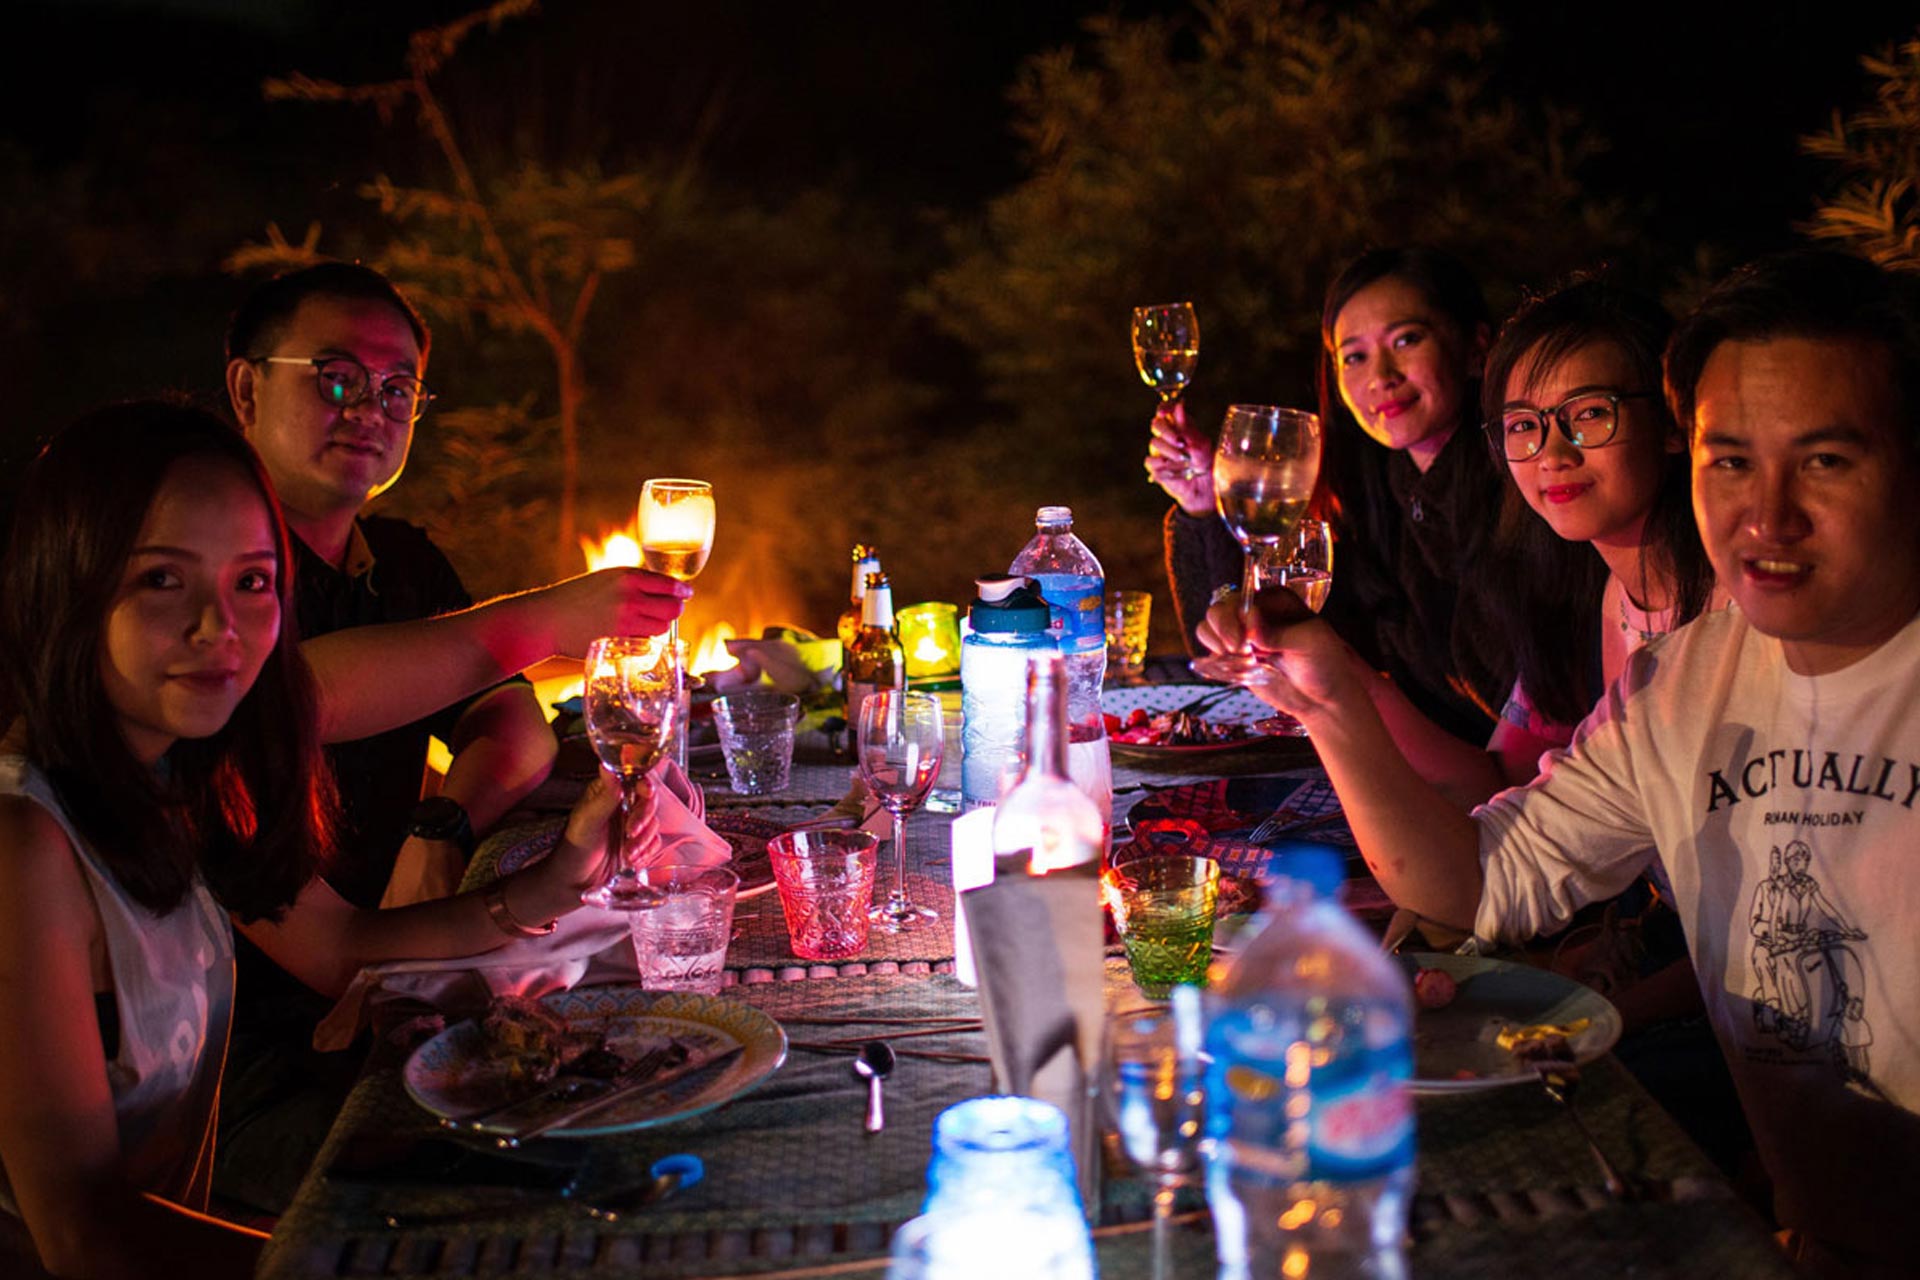 A group of people sitting around a table at night.